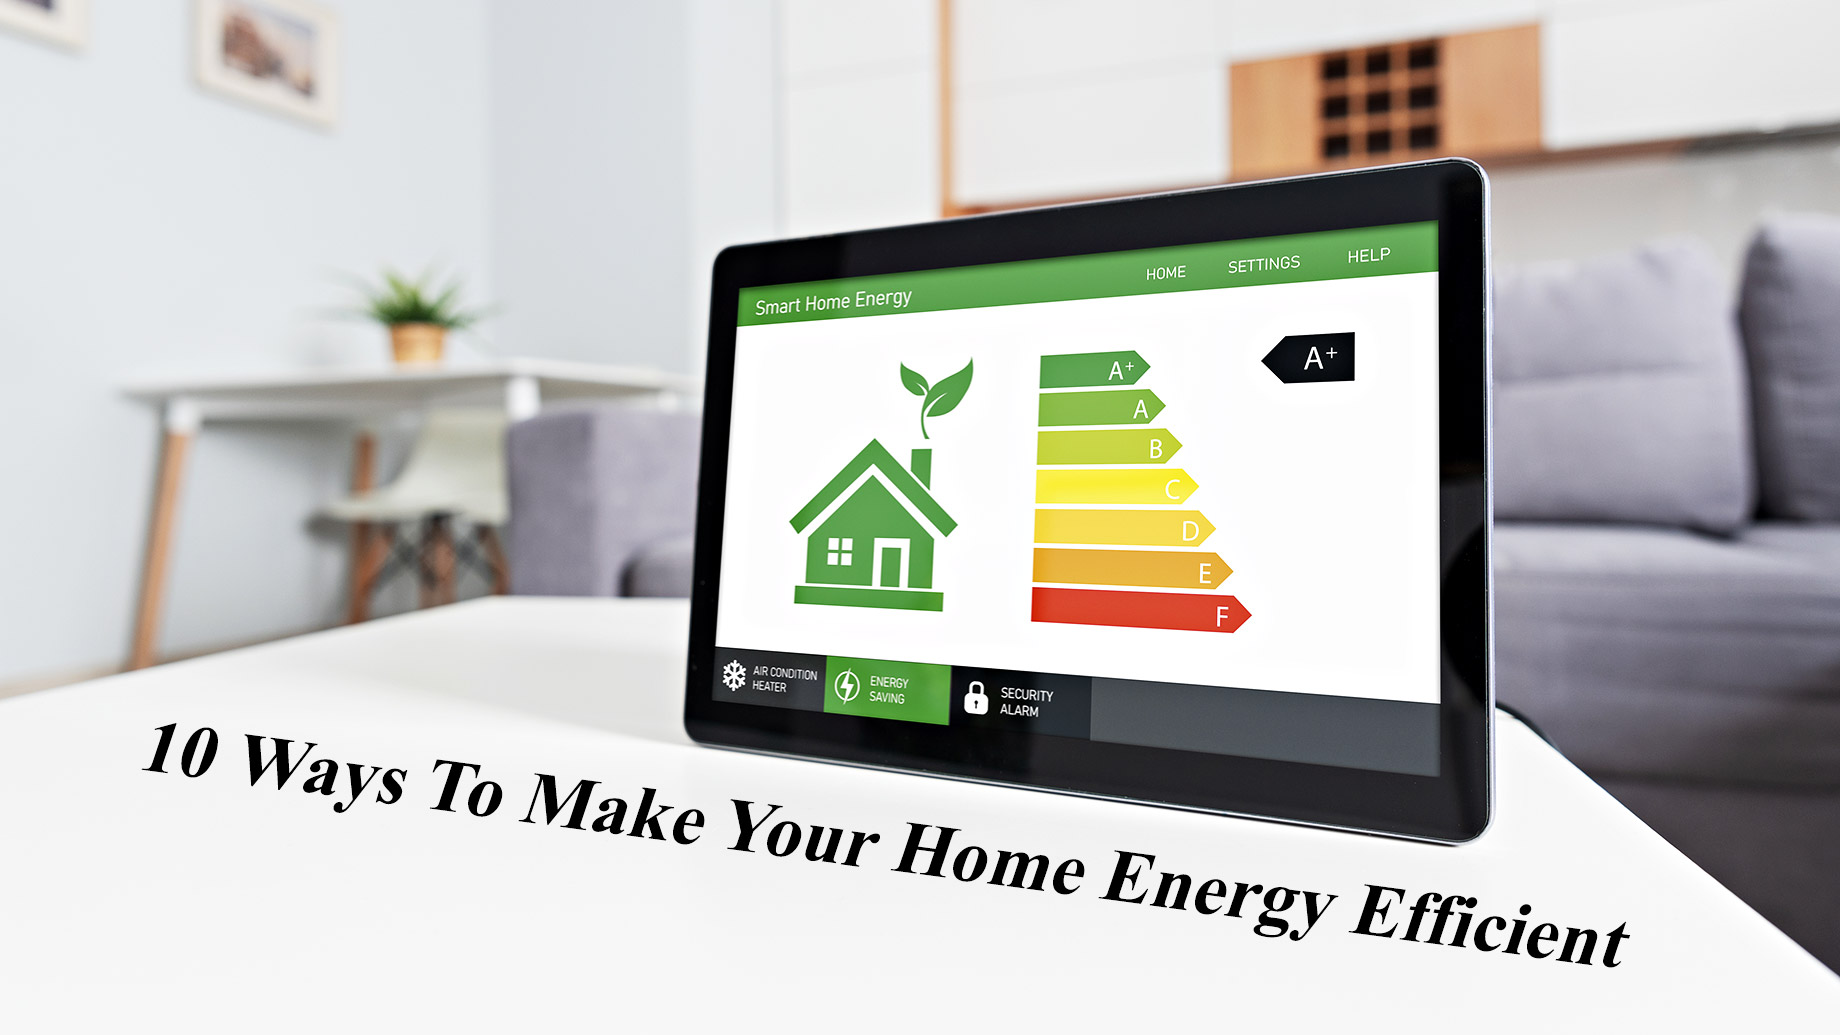 10 Ways To Make Your Home Energy Efficient